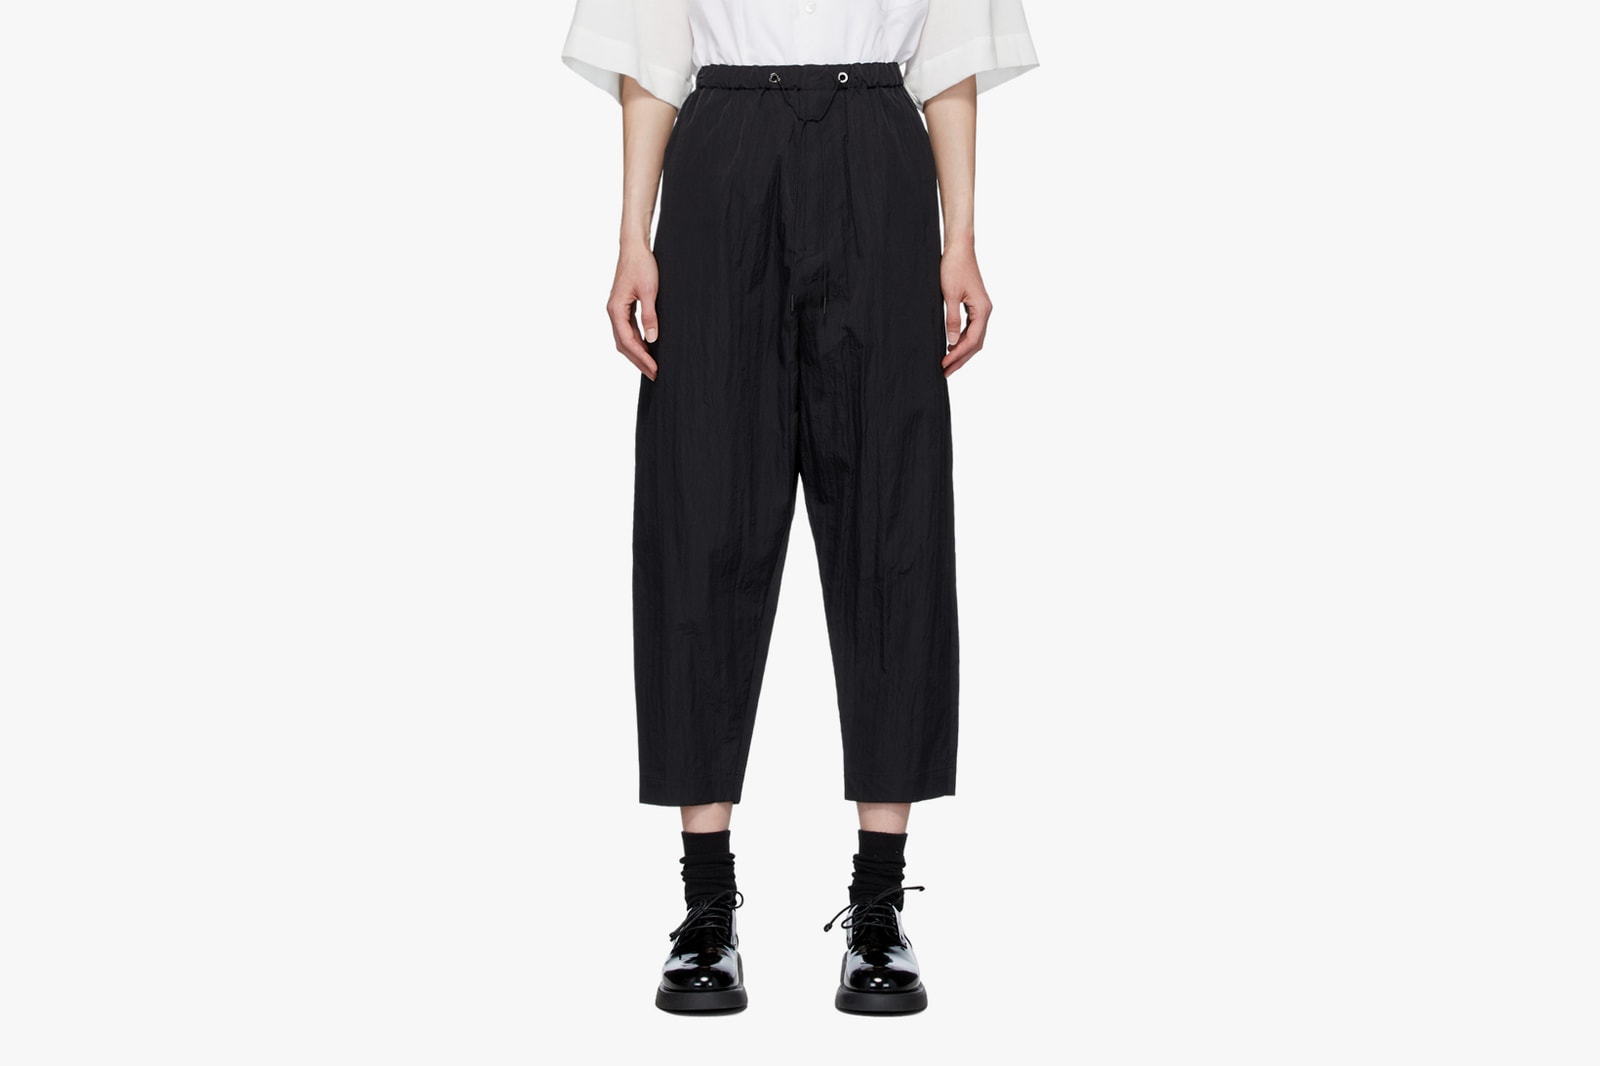 best comfy-chic pants at-home loungwear spring pleats please issey miyake ader error fumito ganryu